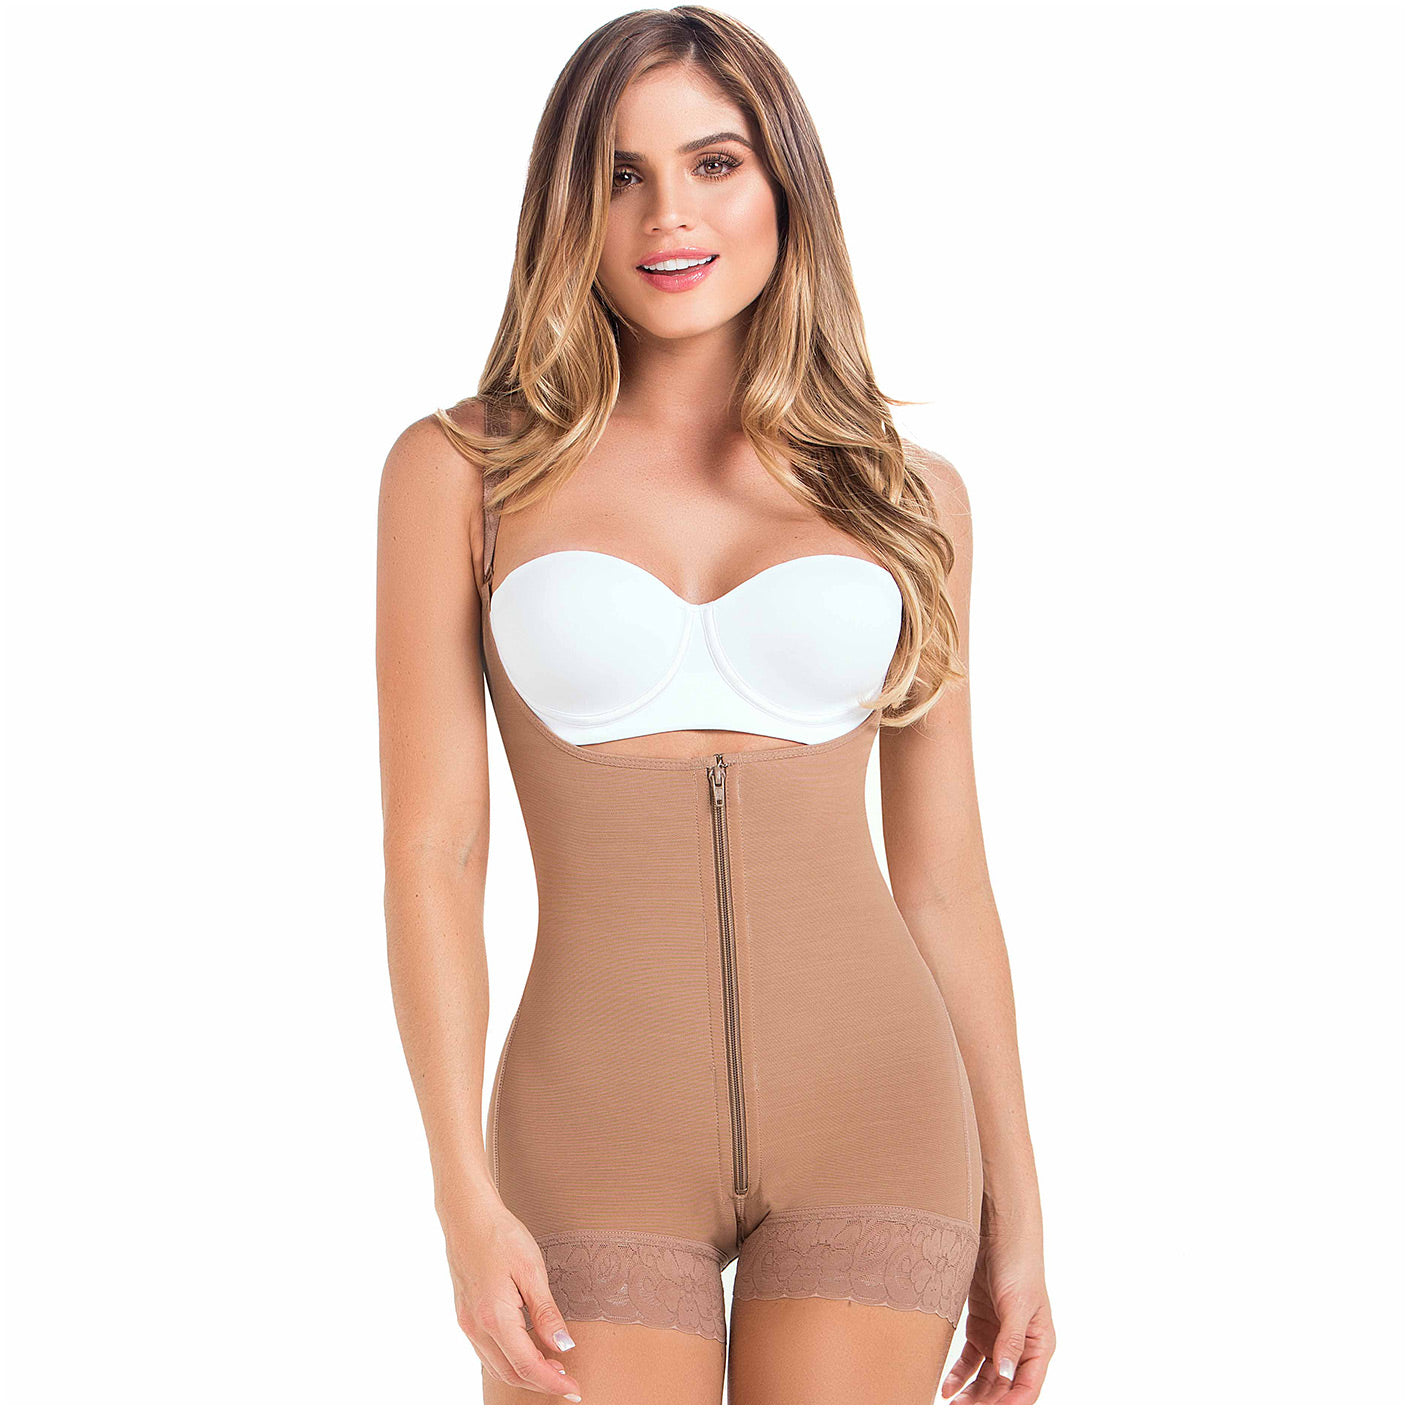 Daily Use Full Body Shaper | Postsurgical Girdle | Diane and Geordi Fajas  2397